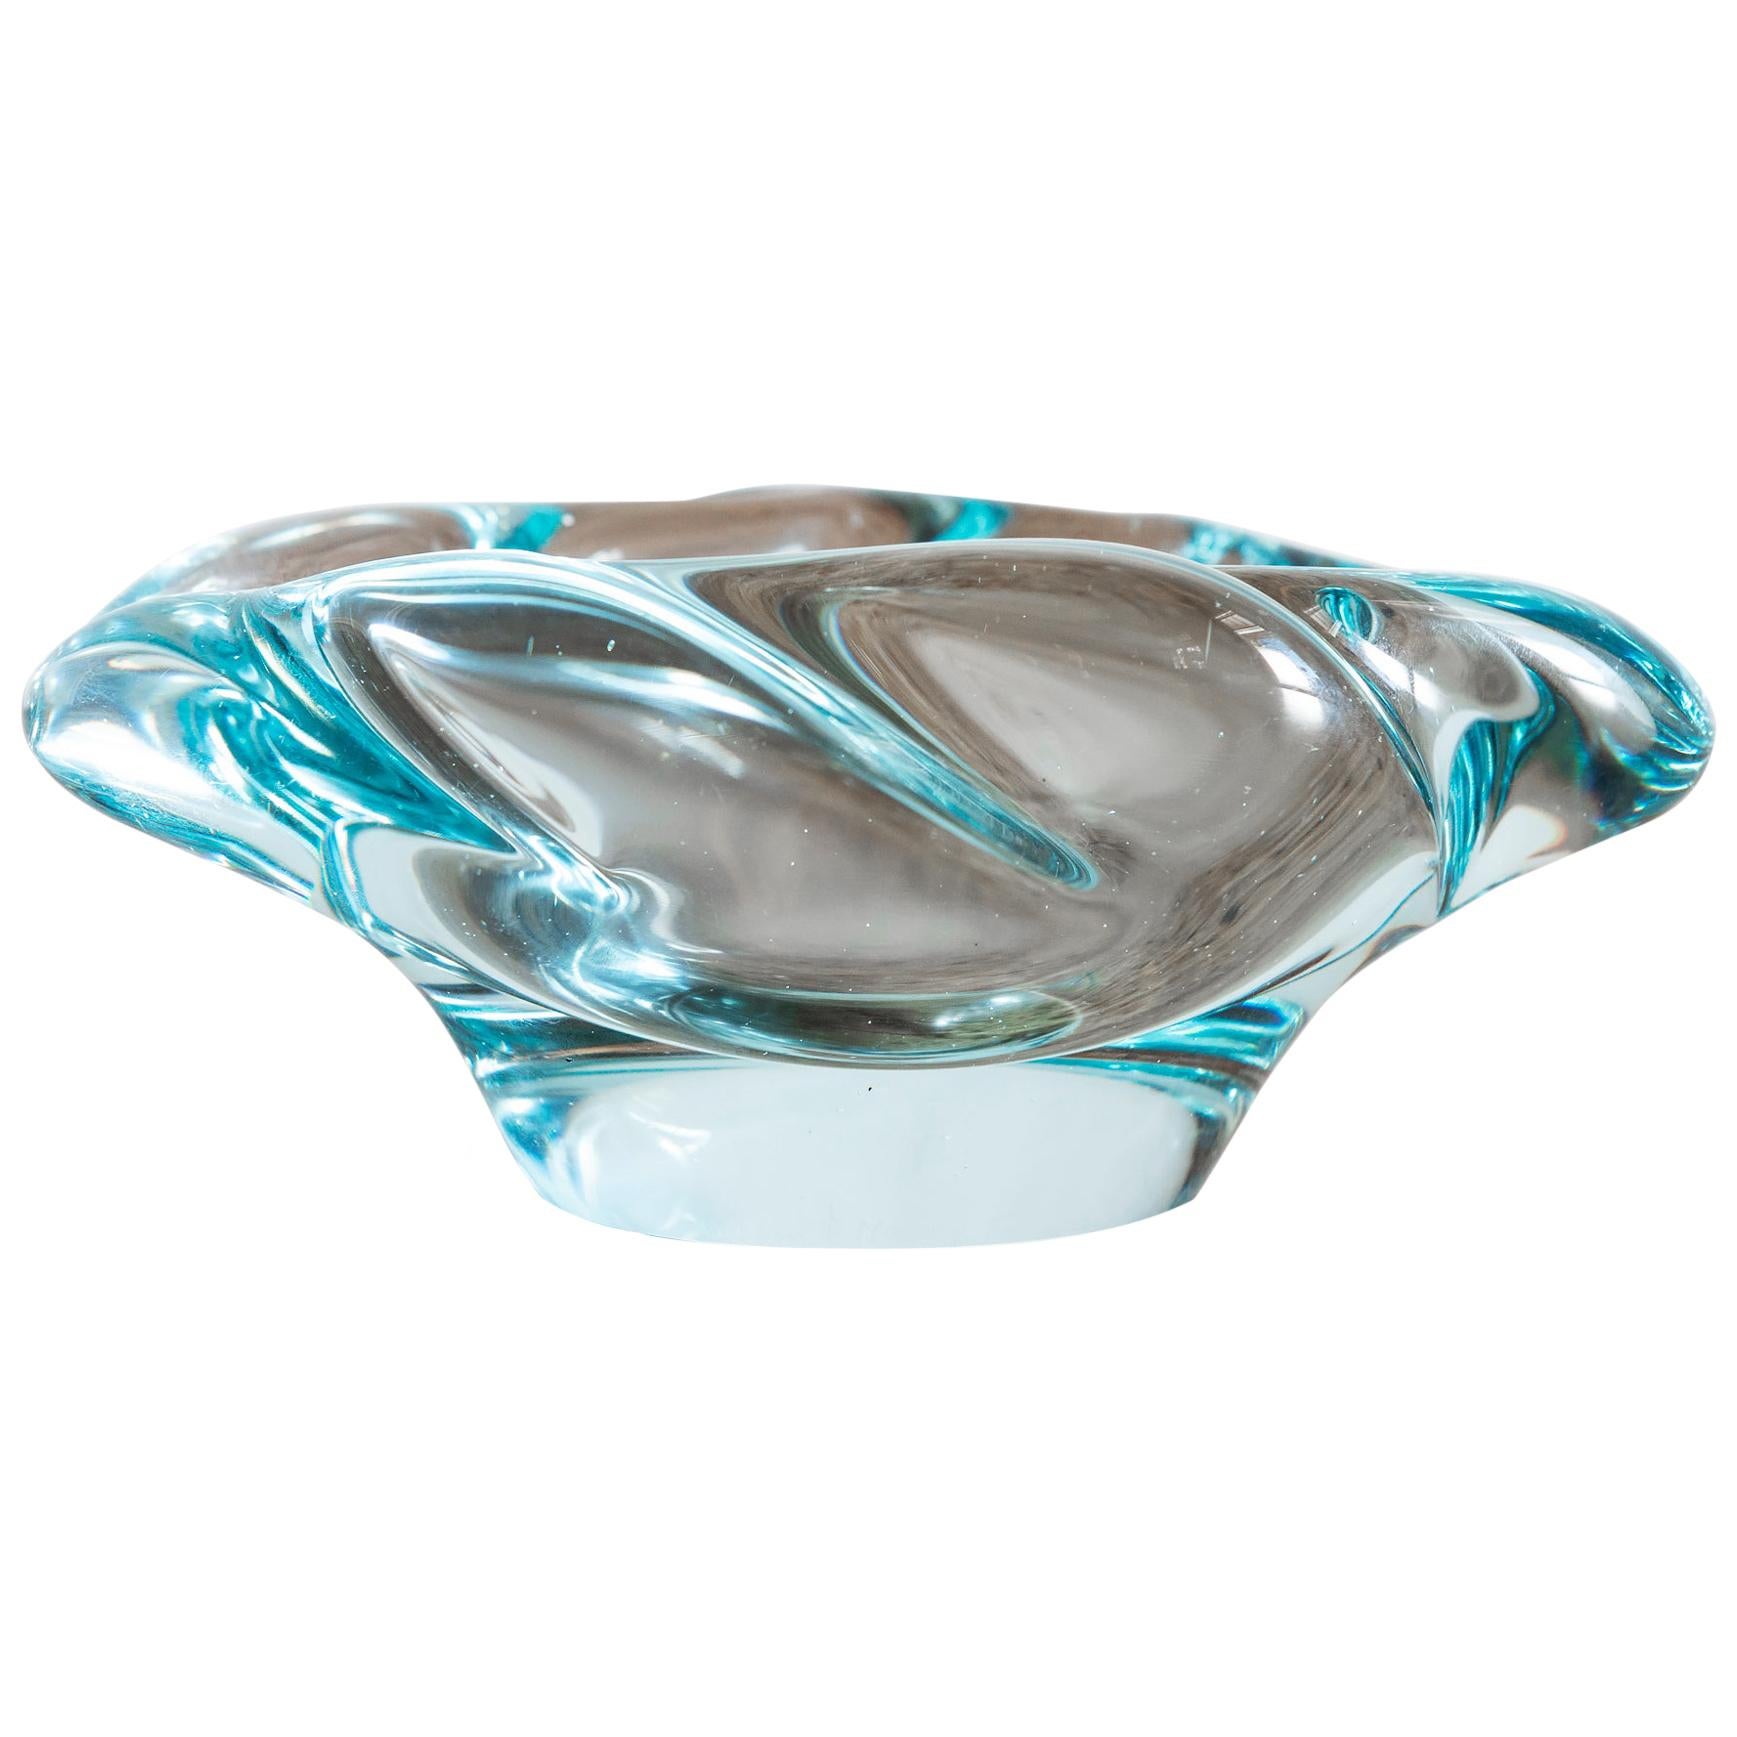 Ethereal Blue Crystal Bowl by Daum, France, 1950s